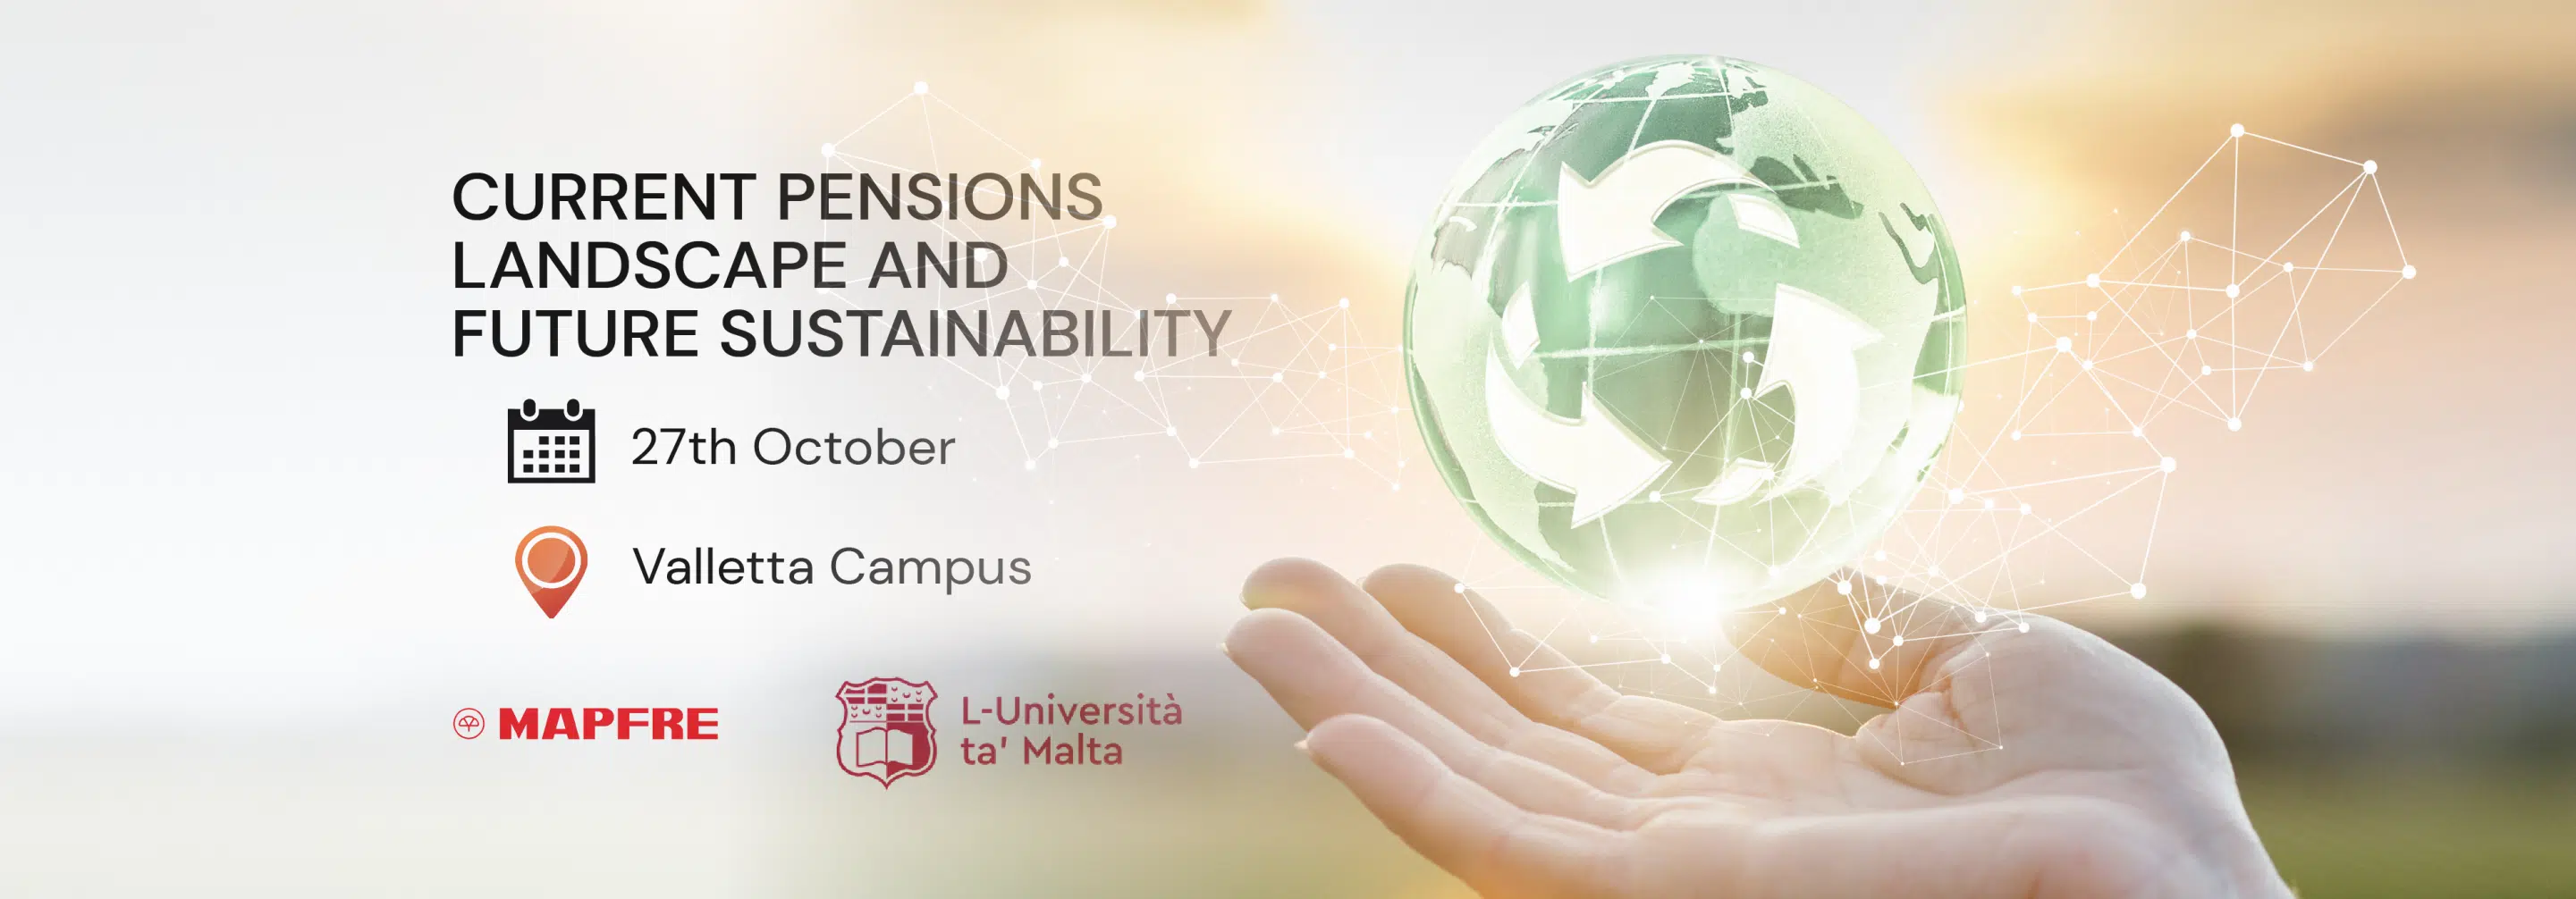 MAPFRE to hold Conference in collaboration with the University of Malta on Pensions Landscape and Future Sustainability